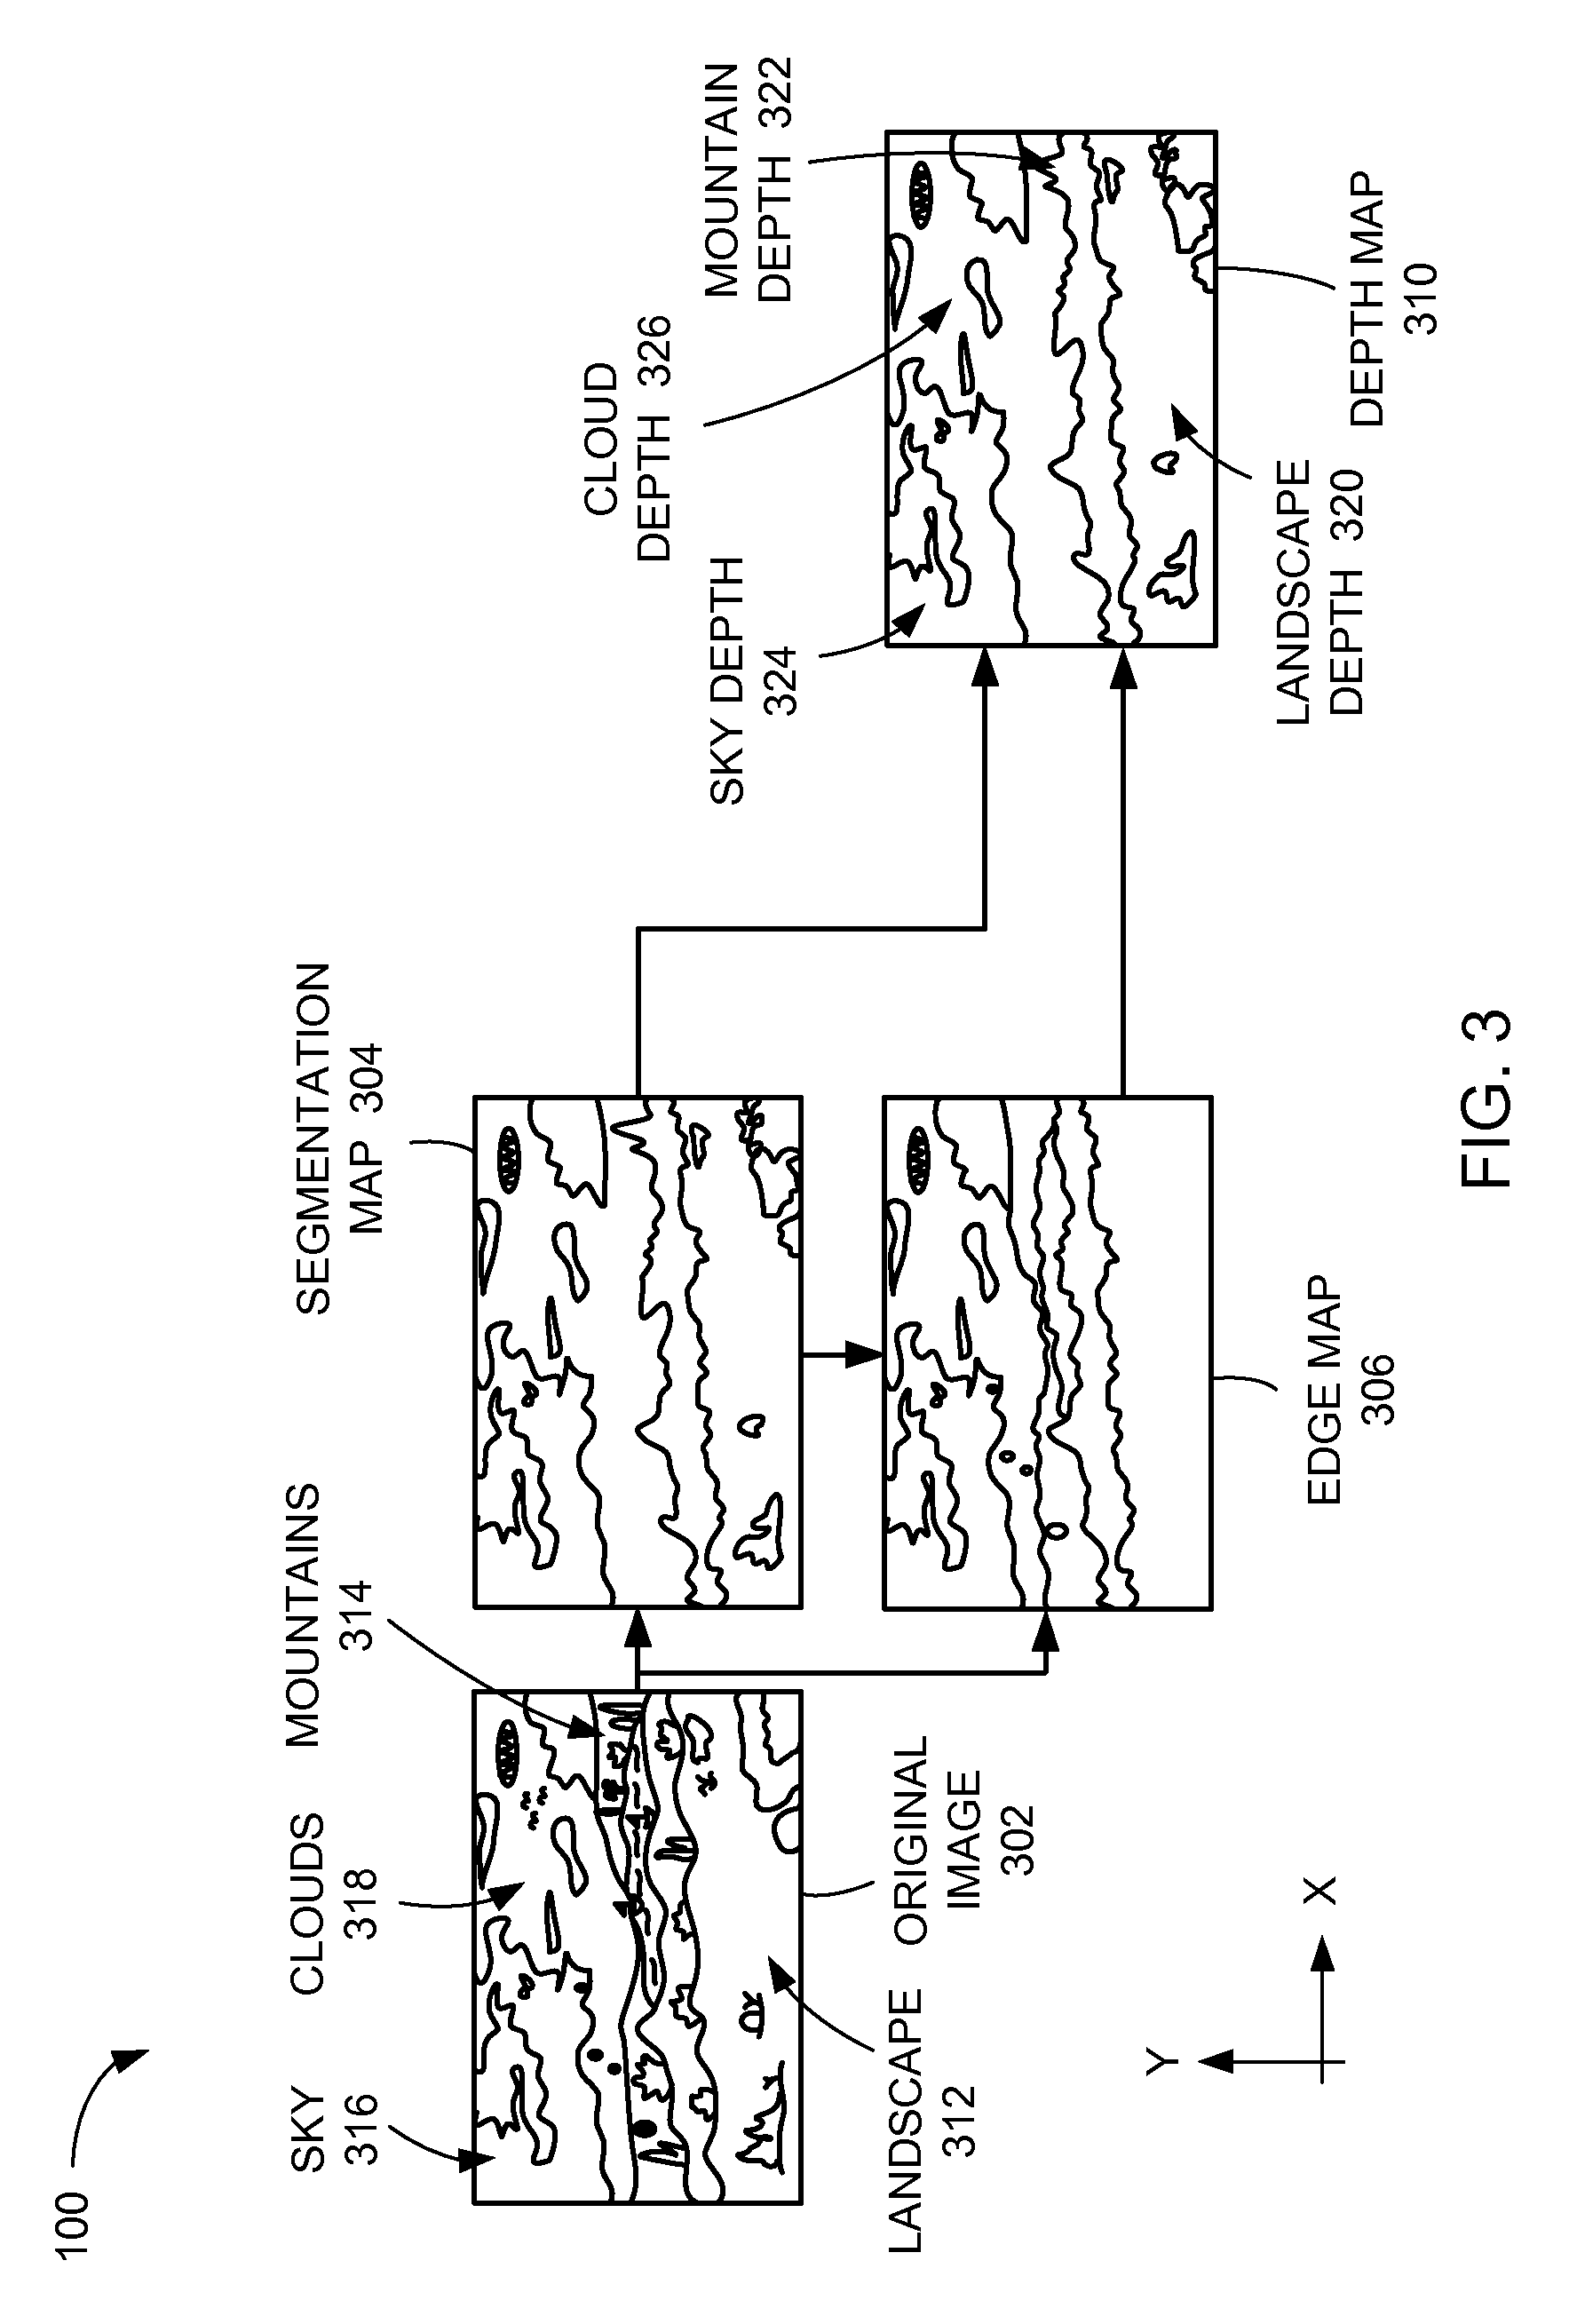 Display system with image conversion mechanism and method of operation thereof